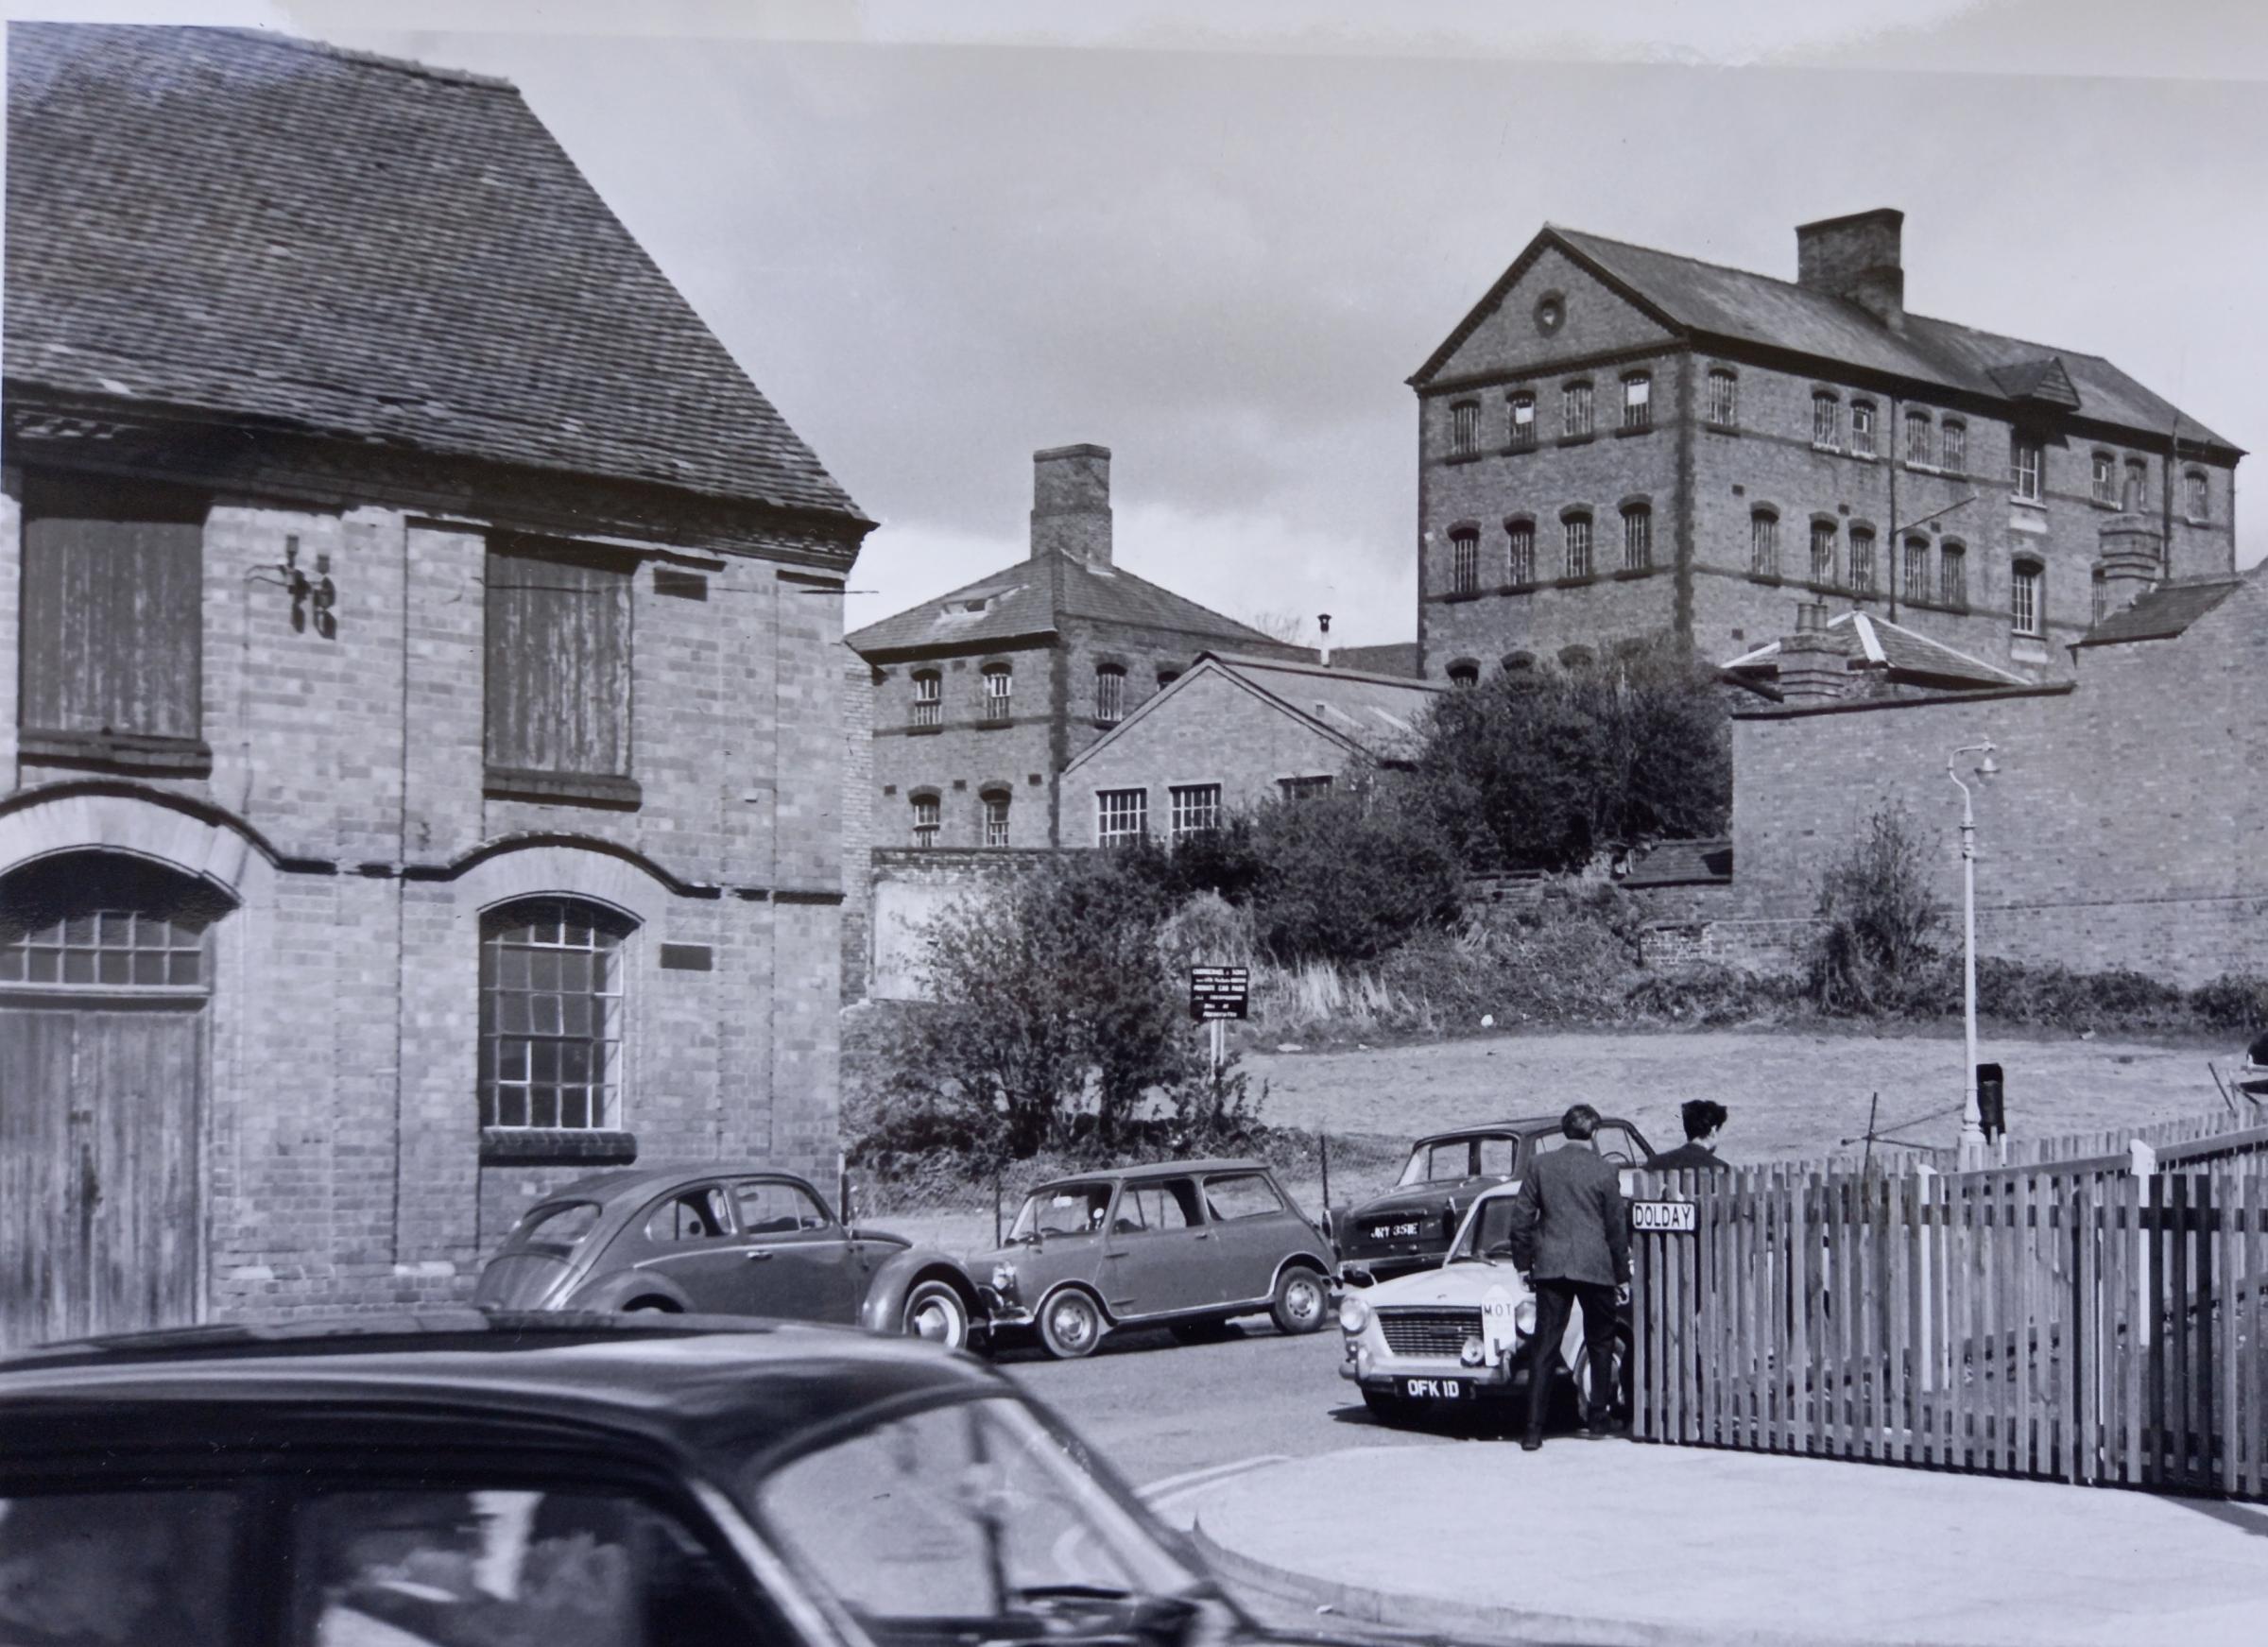 One of the last parts of old Dolday to be demolished, taken in the late 1960s